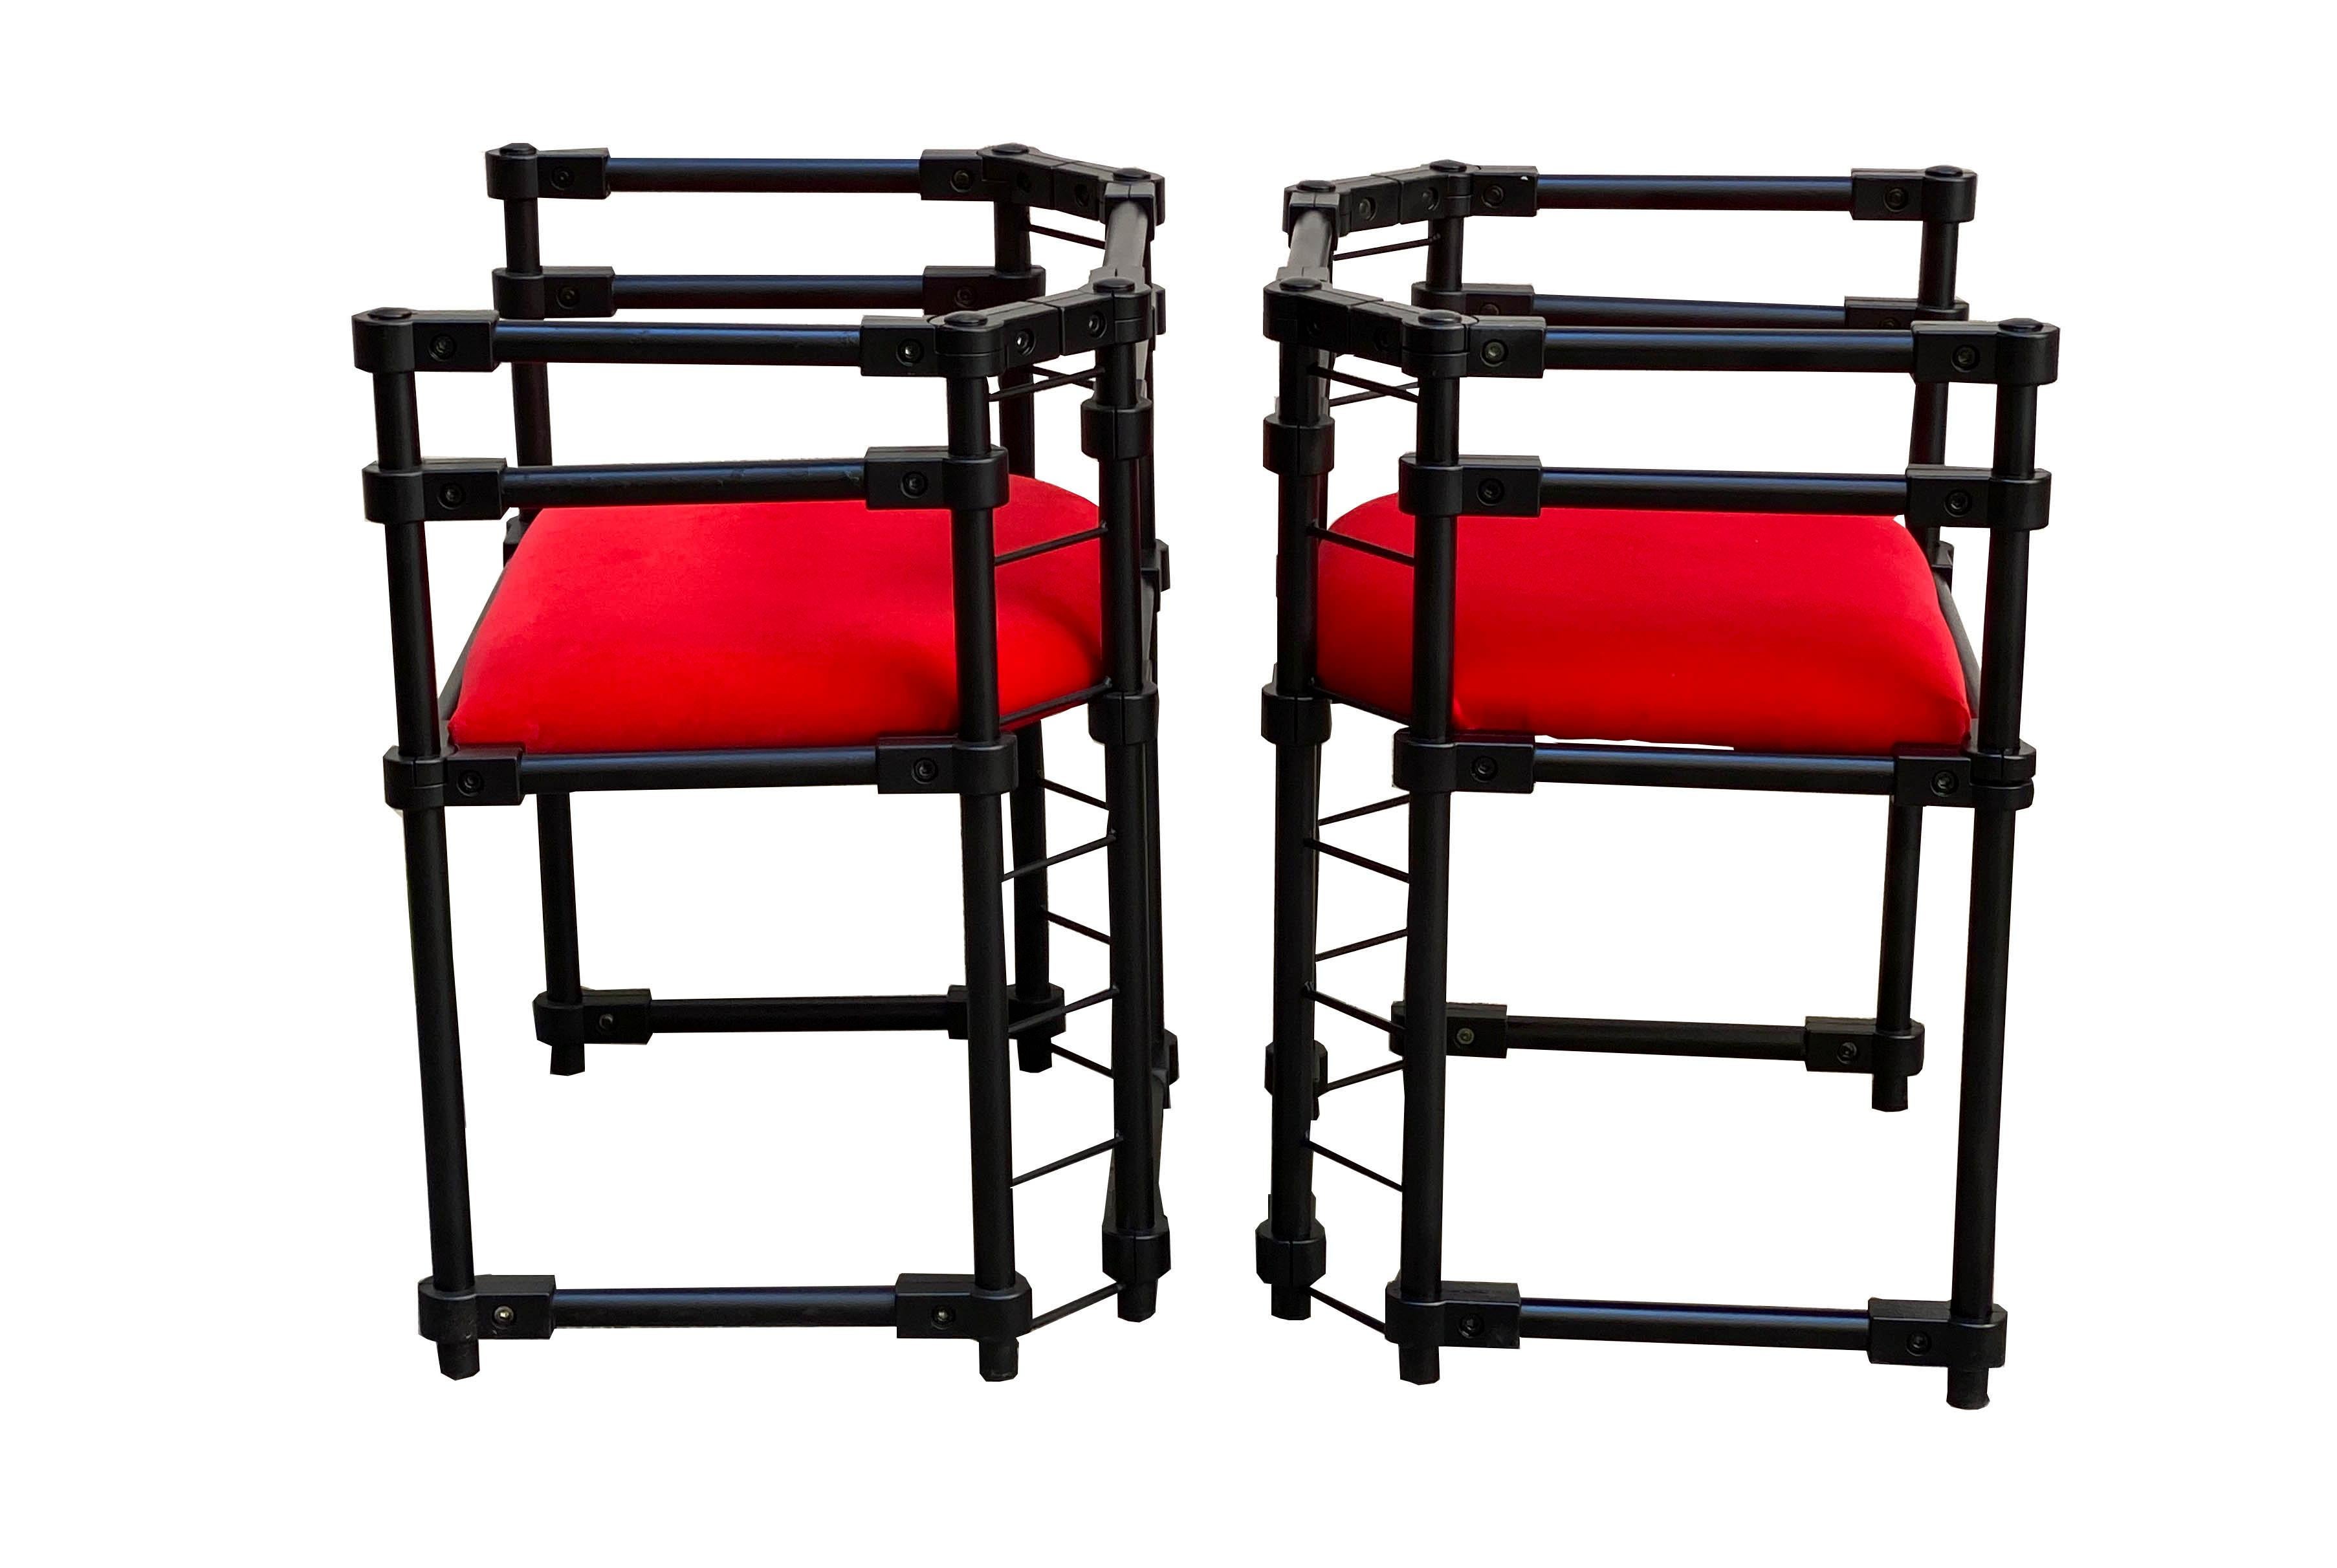 Pair of modern armchairs with black painted metal frame and red velvet seat, the armchairs are wide and comfortable seating, suitable for both office and dining table.
 